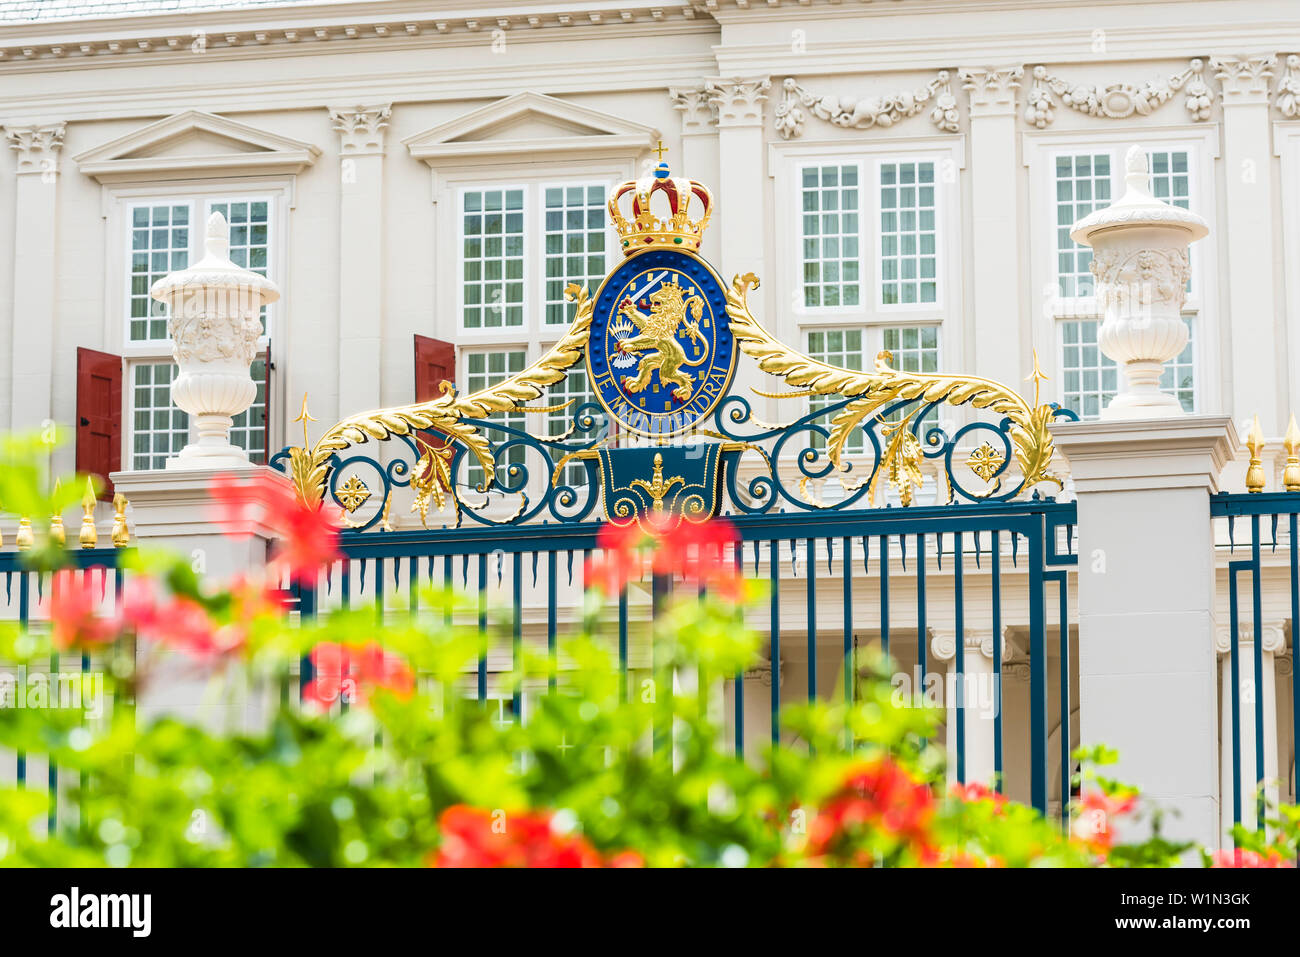 The coat of arms at the entrance to the king's palace Noordeinde of the Dutch royal family in the city centre, The Hague, Netherlands Stock Photo